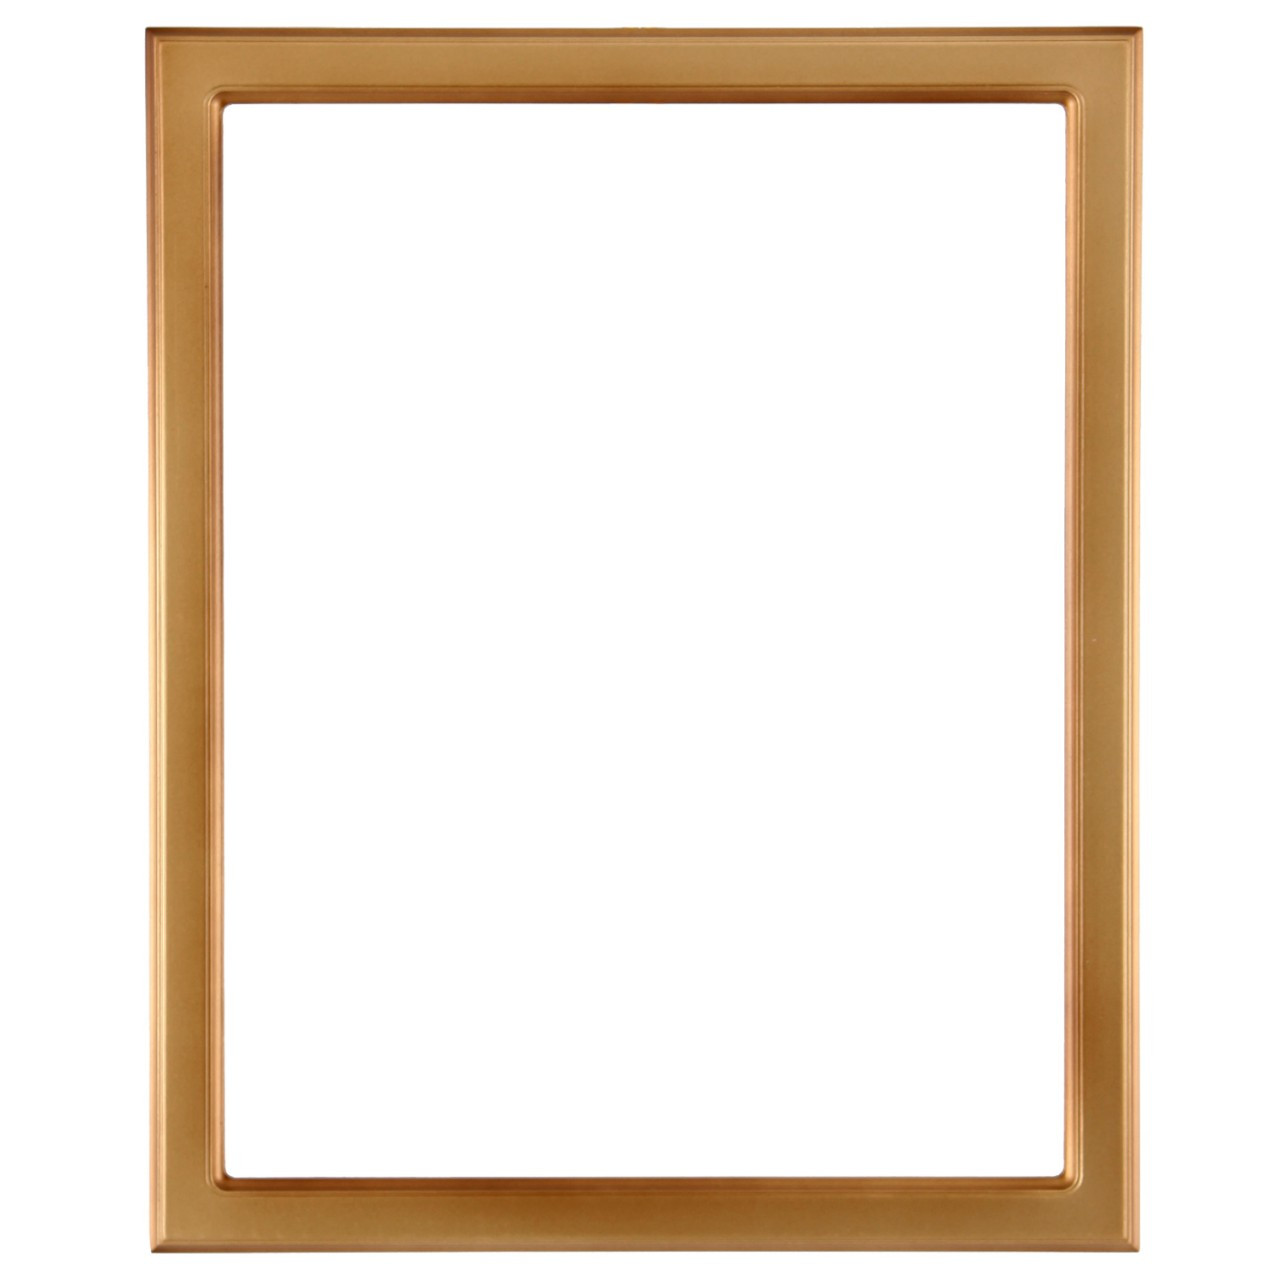 artisane, 16x20”, Picture Frame, Gallery Frame, Solid White Oak